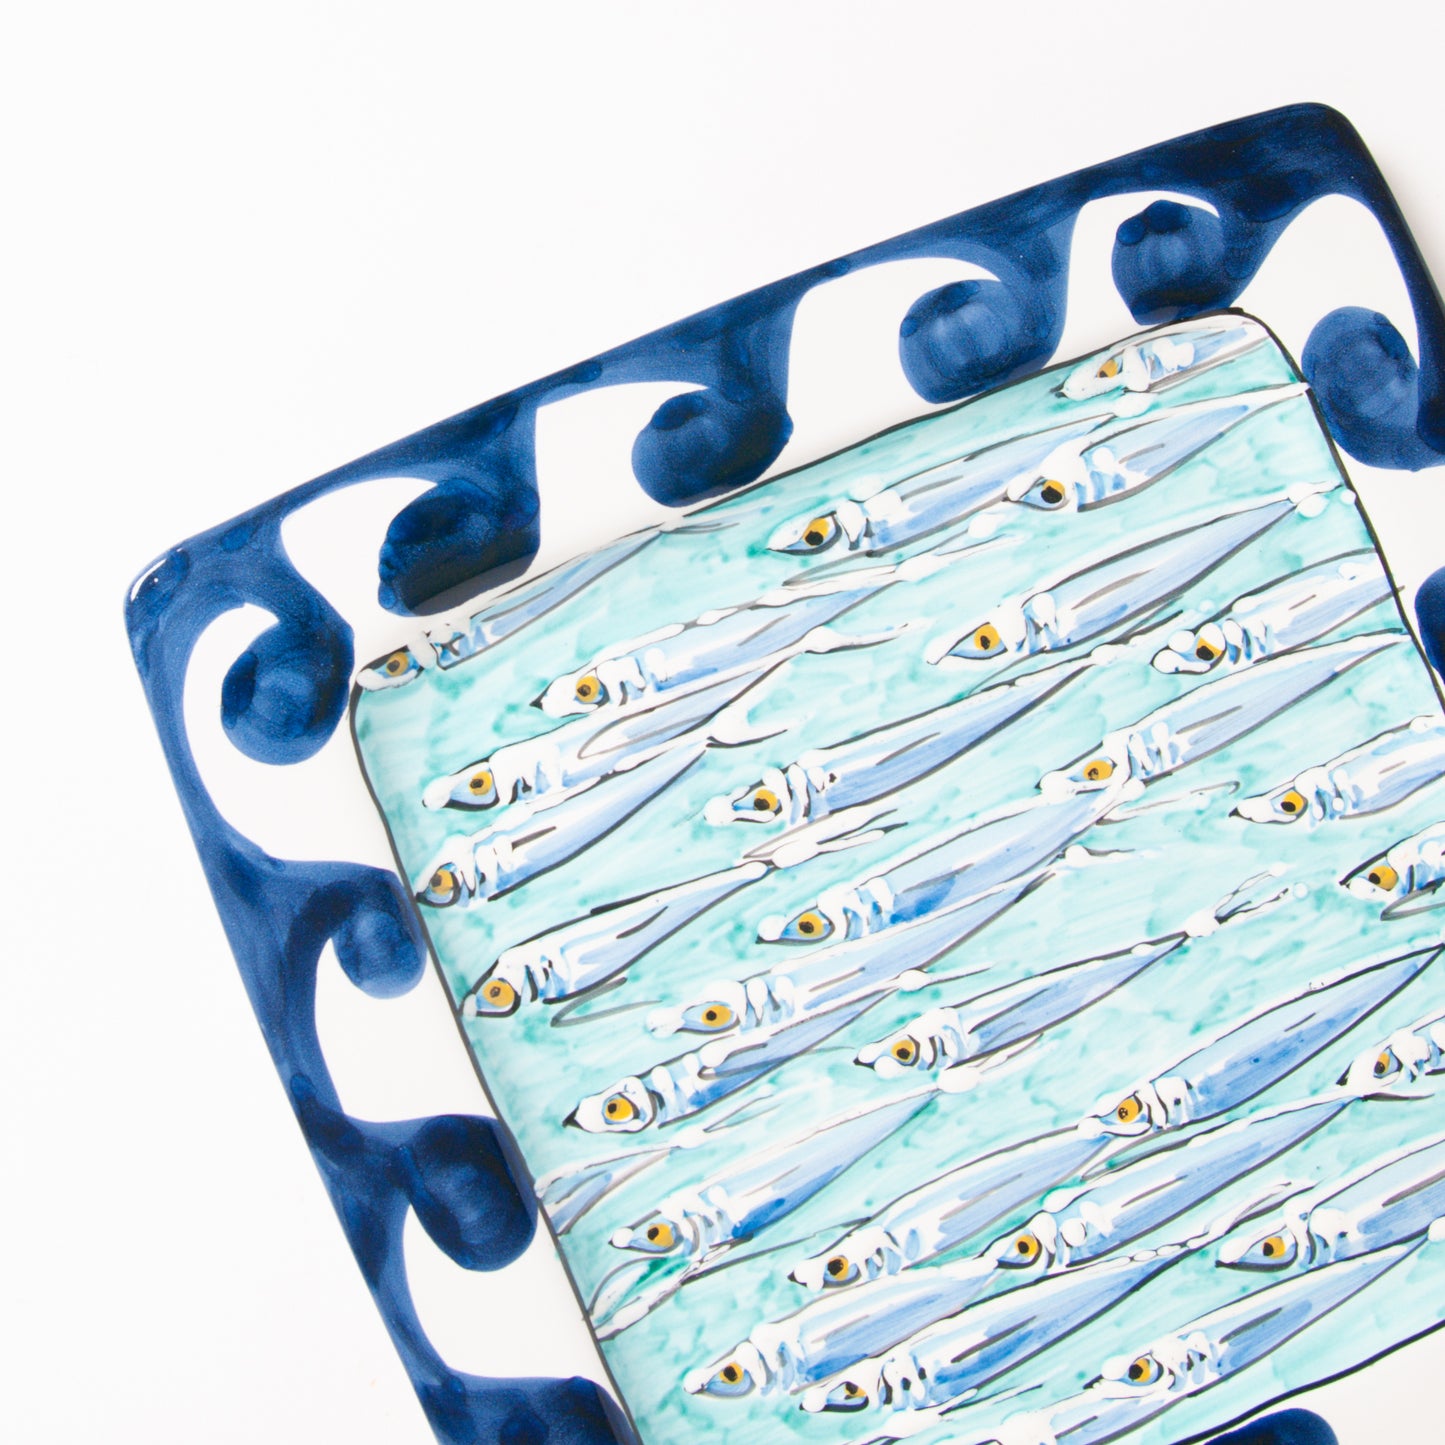 Blue anchovies square tray